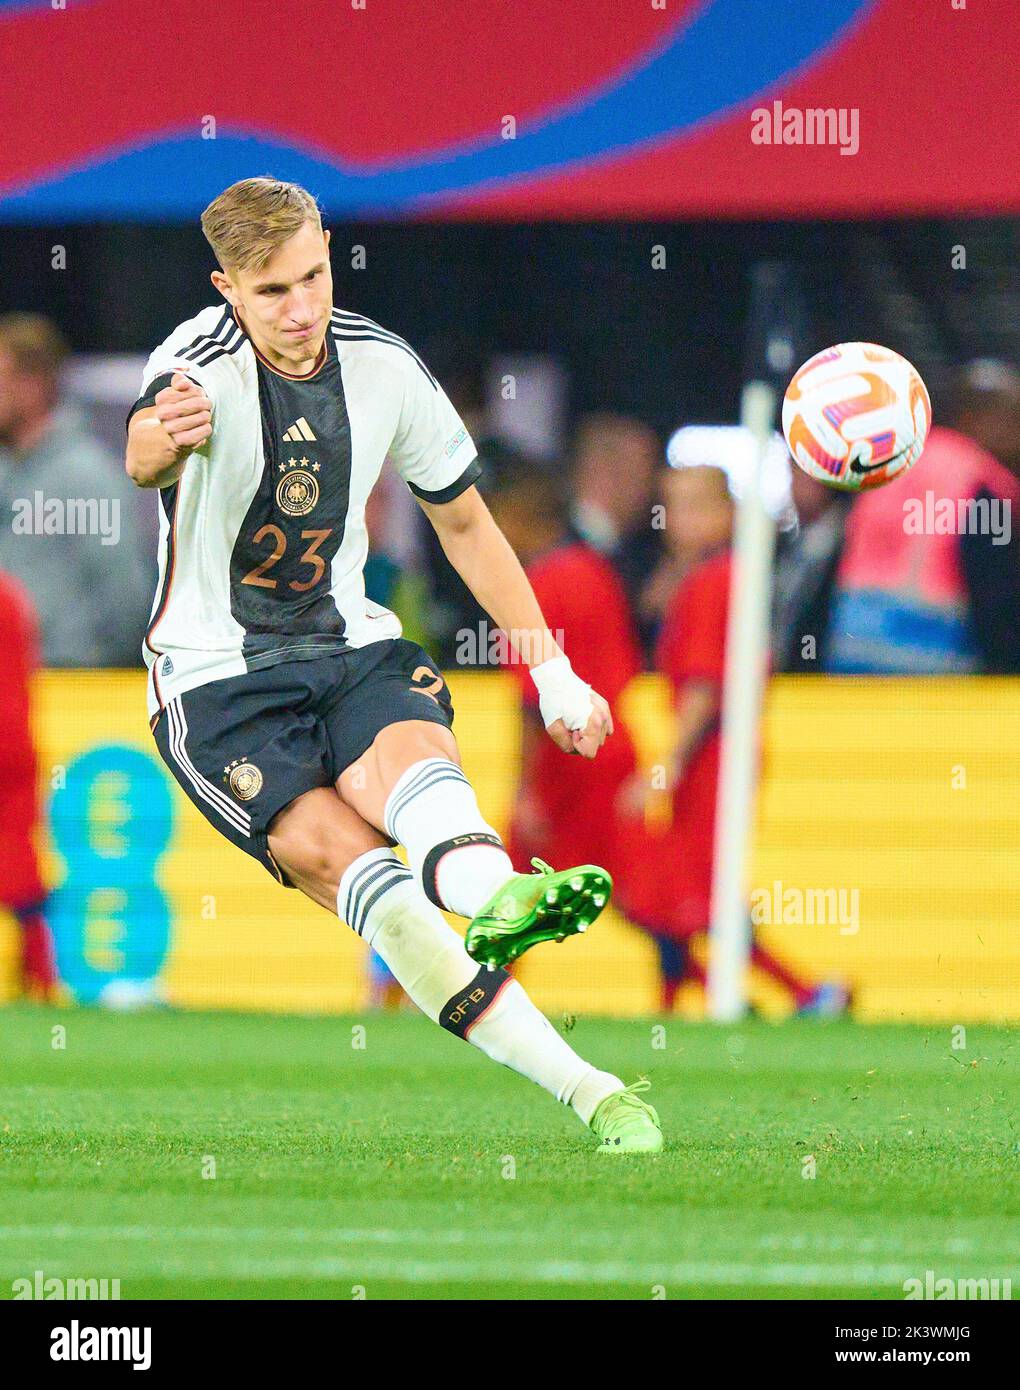 Nico Schlotterbeck, DFB 23  in the UEFA Nations League 2022 match  ENGLAND - GERMANY 3-3  in Season 2022/2023 on Sept 26, 2022  in London, Great Britain.  © Peter Schatz / Alamy Live News Stock Photo